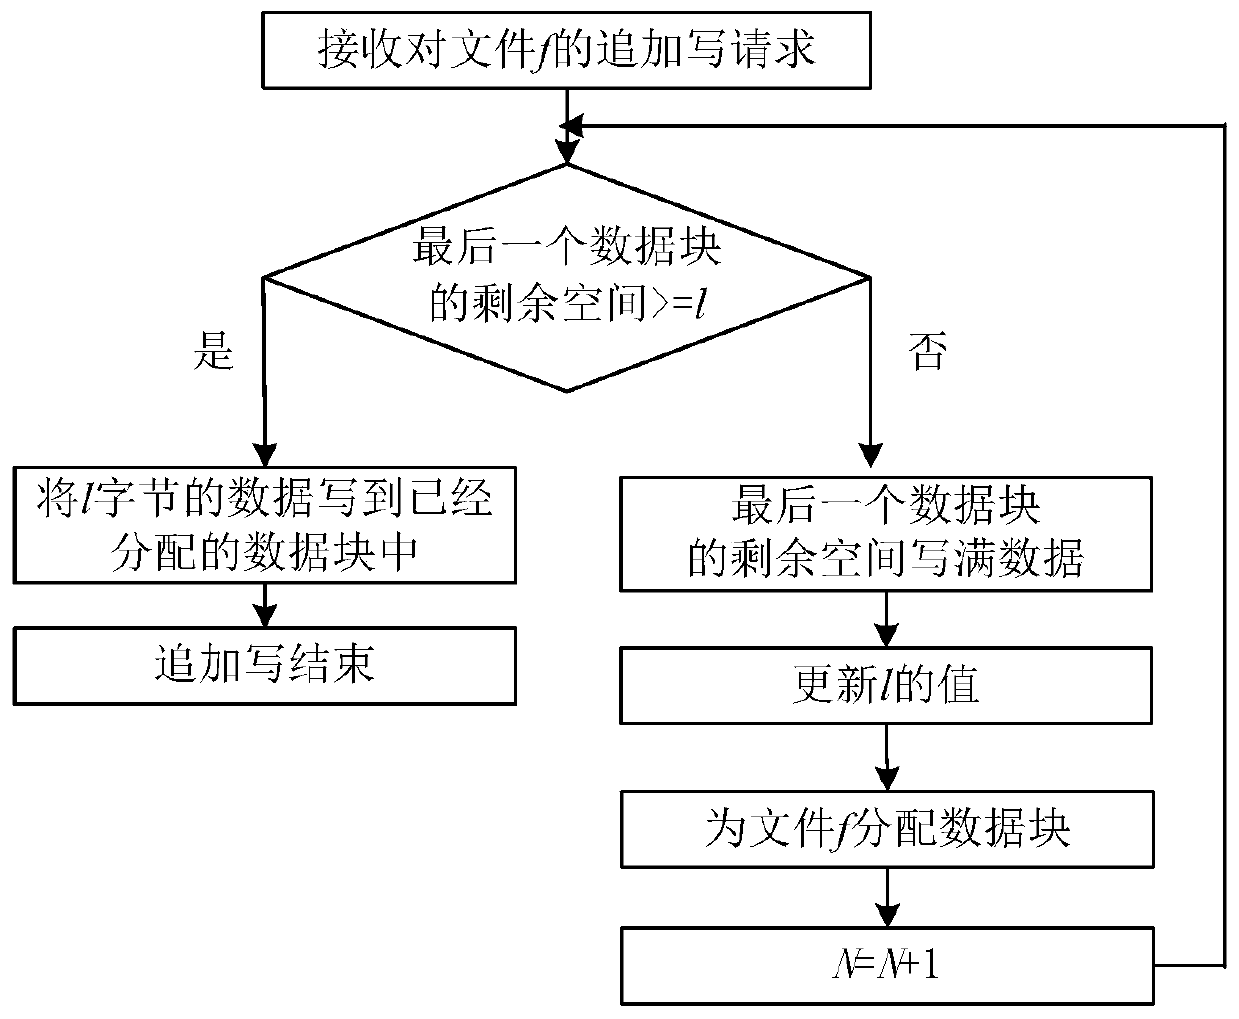 Low-latency file system address space management method and system and medium